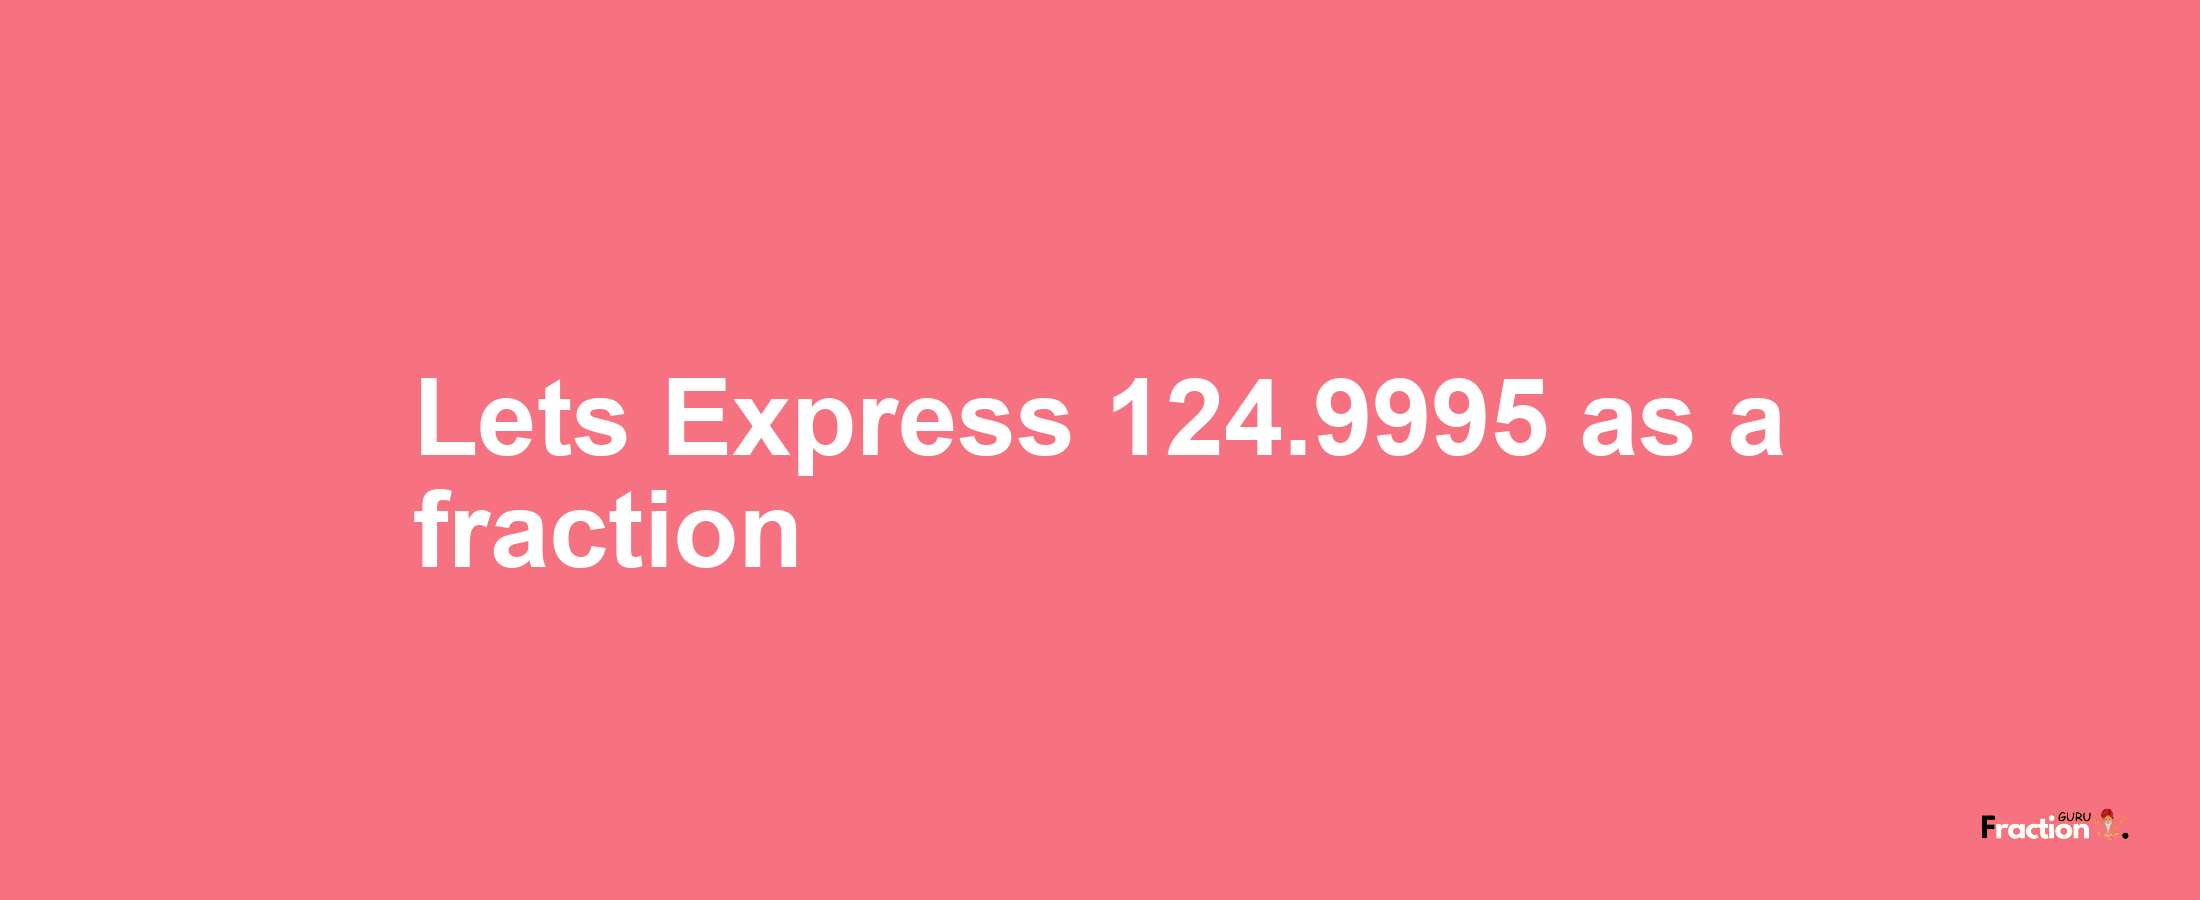 Lets Express 124.9995 as afraction